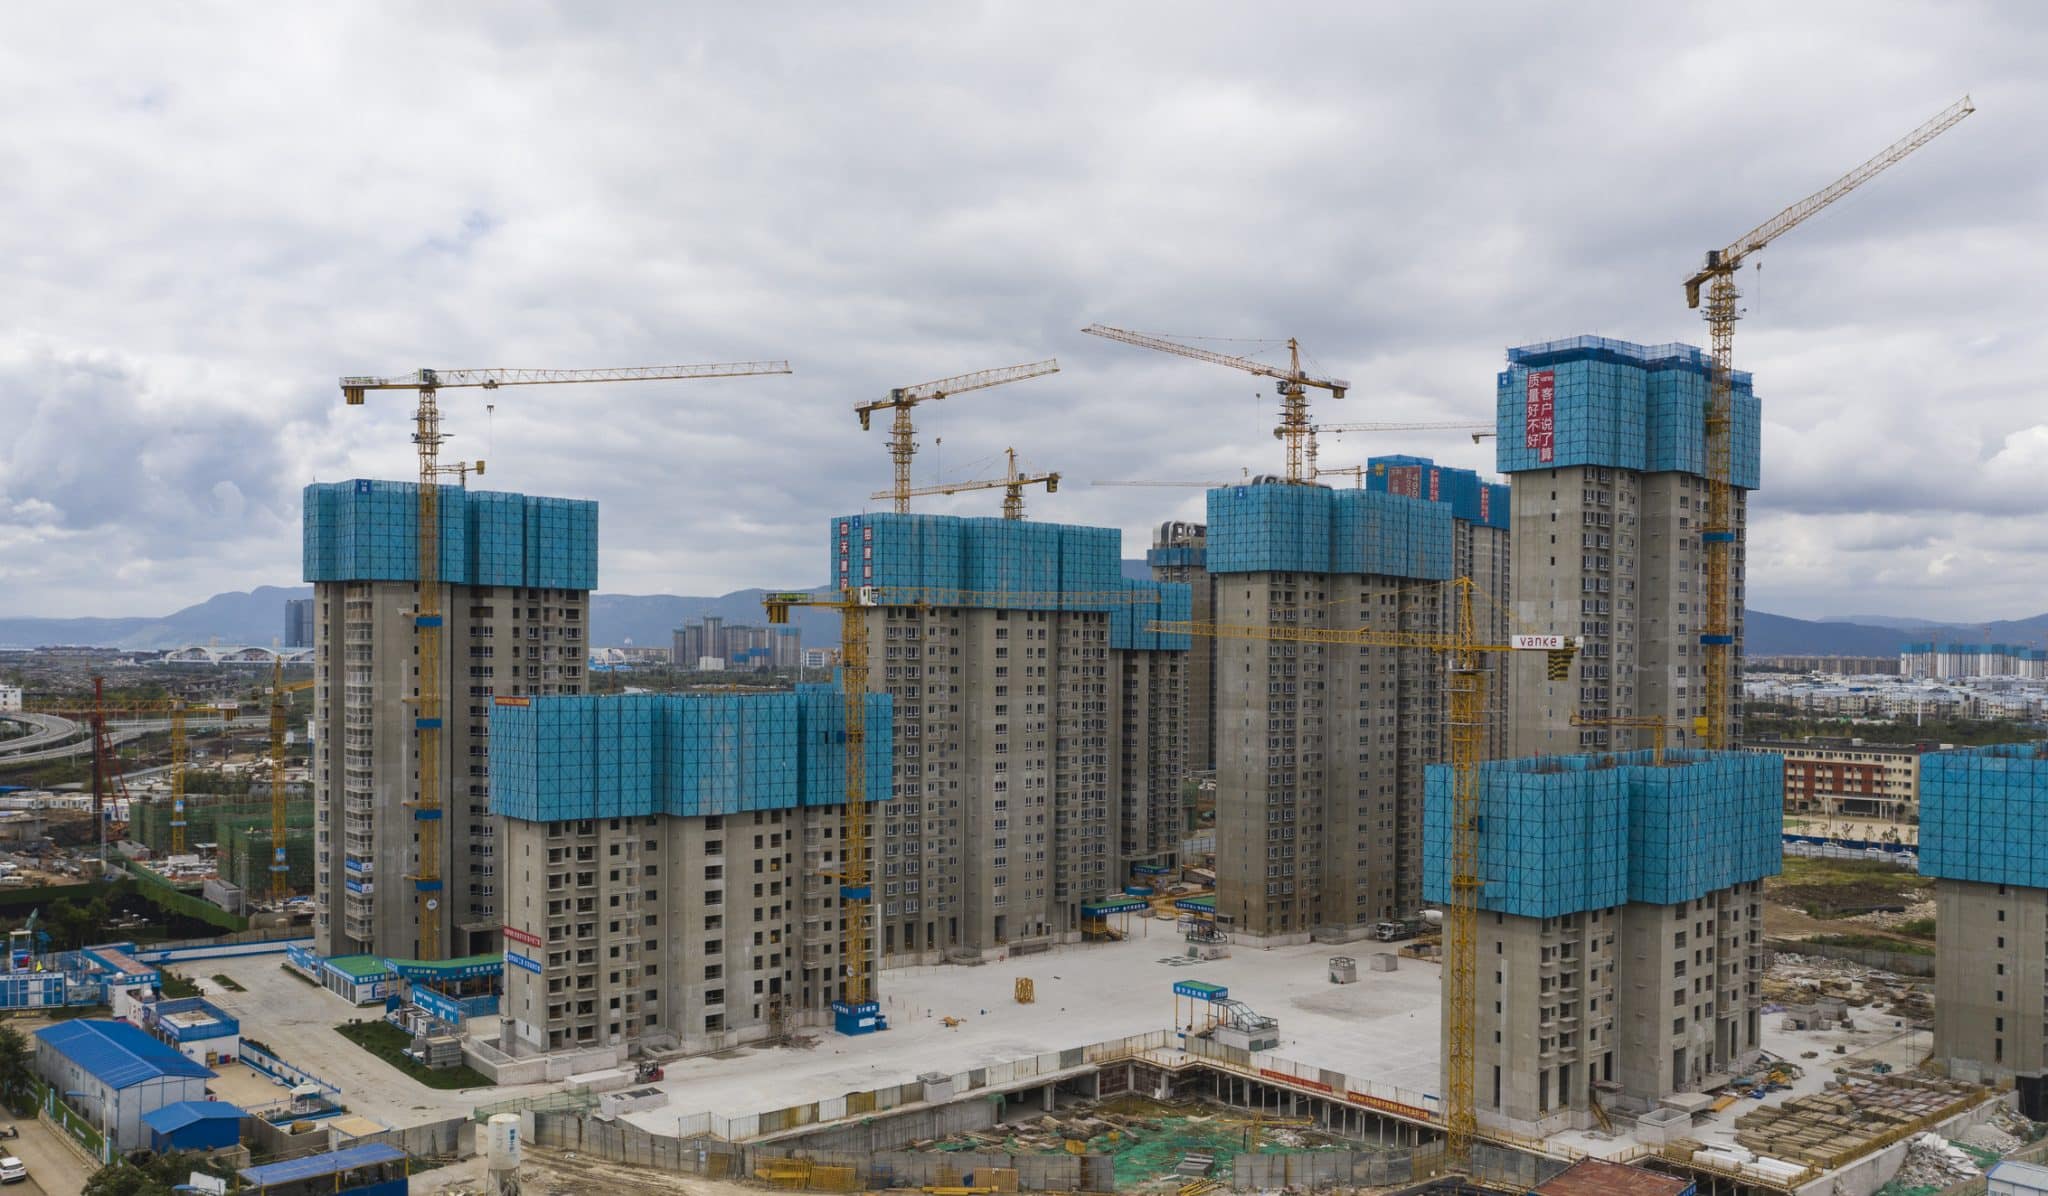 China pledges $42B for local governments to buy up millions of unsold homes